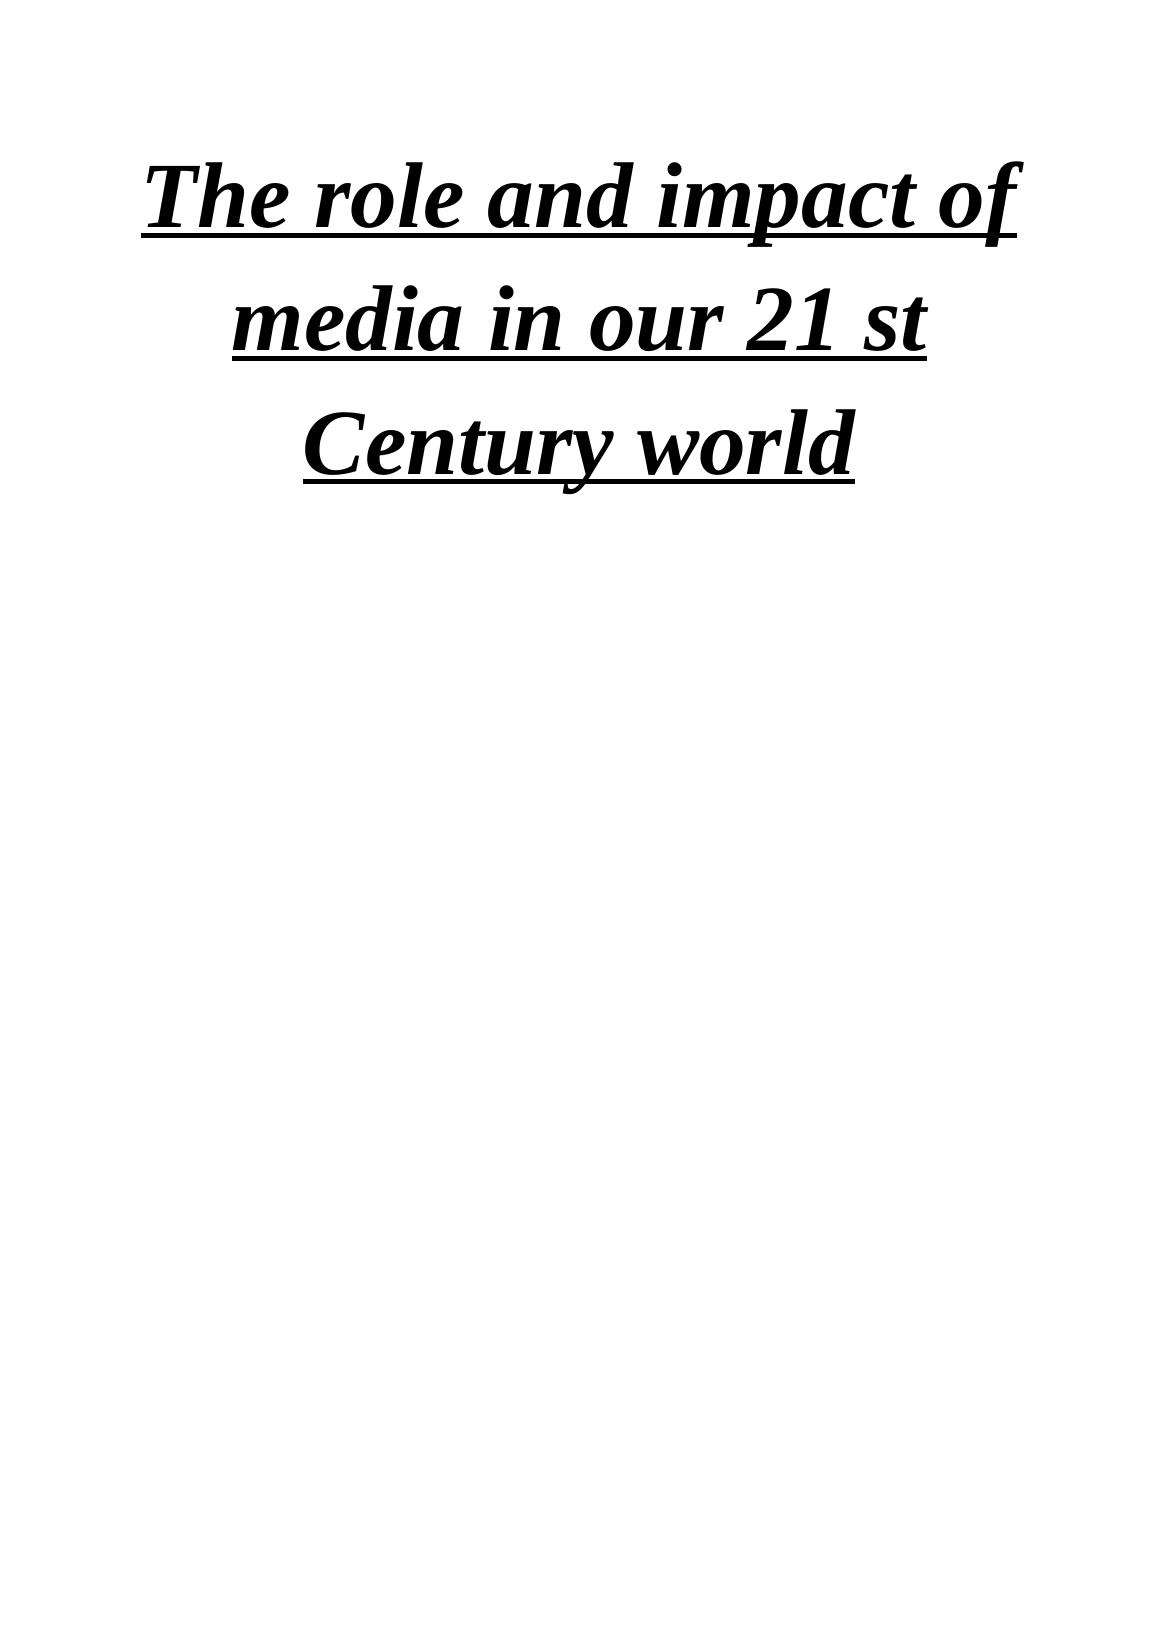 The Role and Impact of Media in Our 21st Century World_1